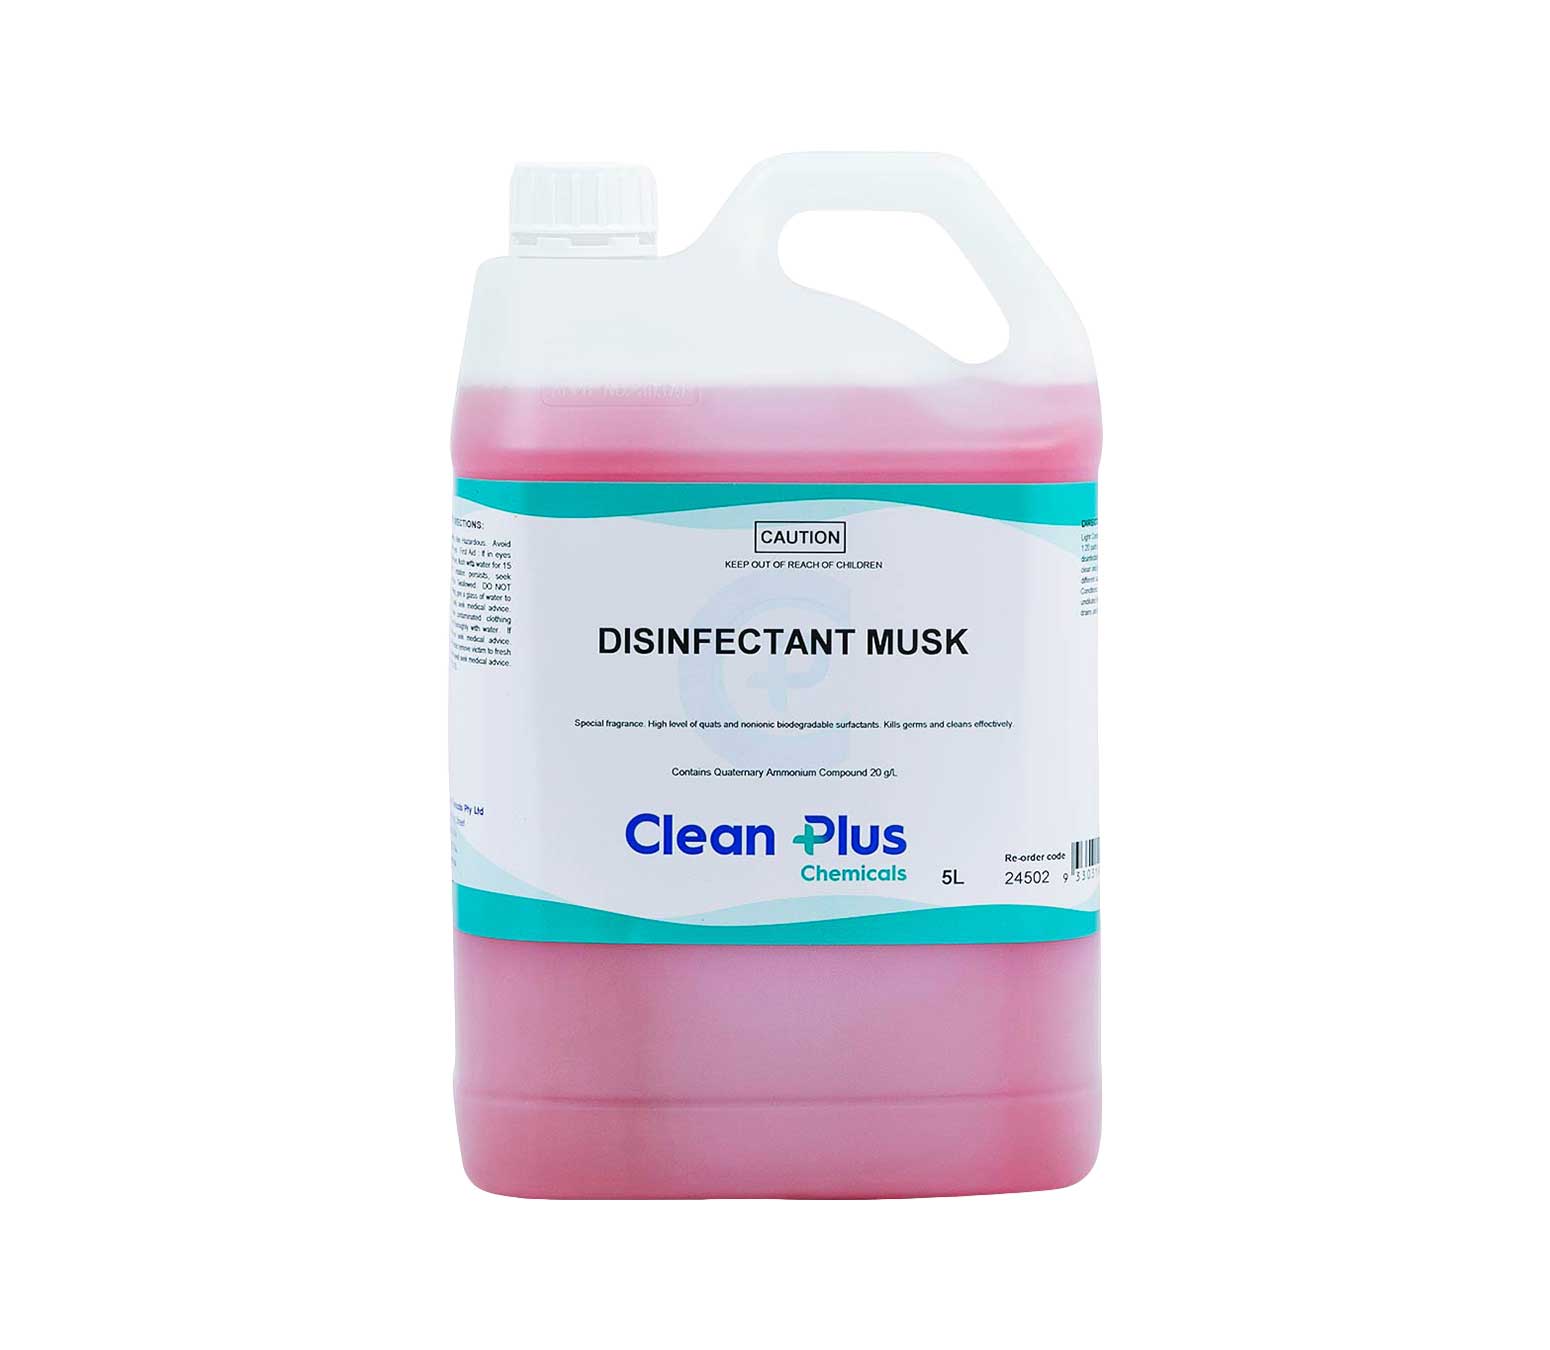 Disinfectant Musk - Special fragrance.